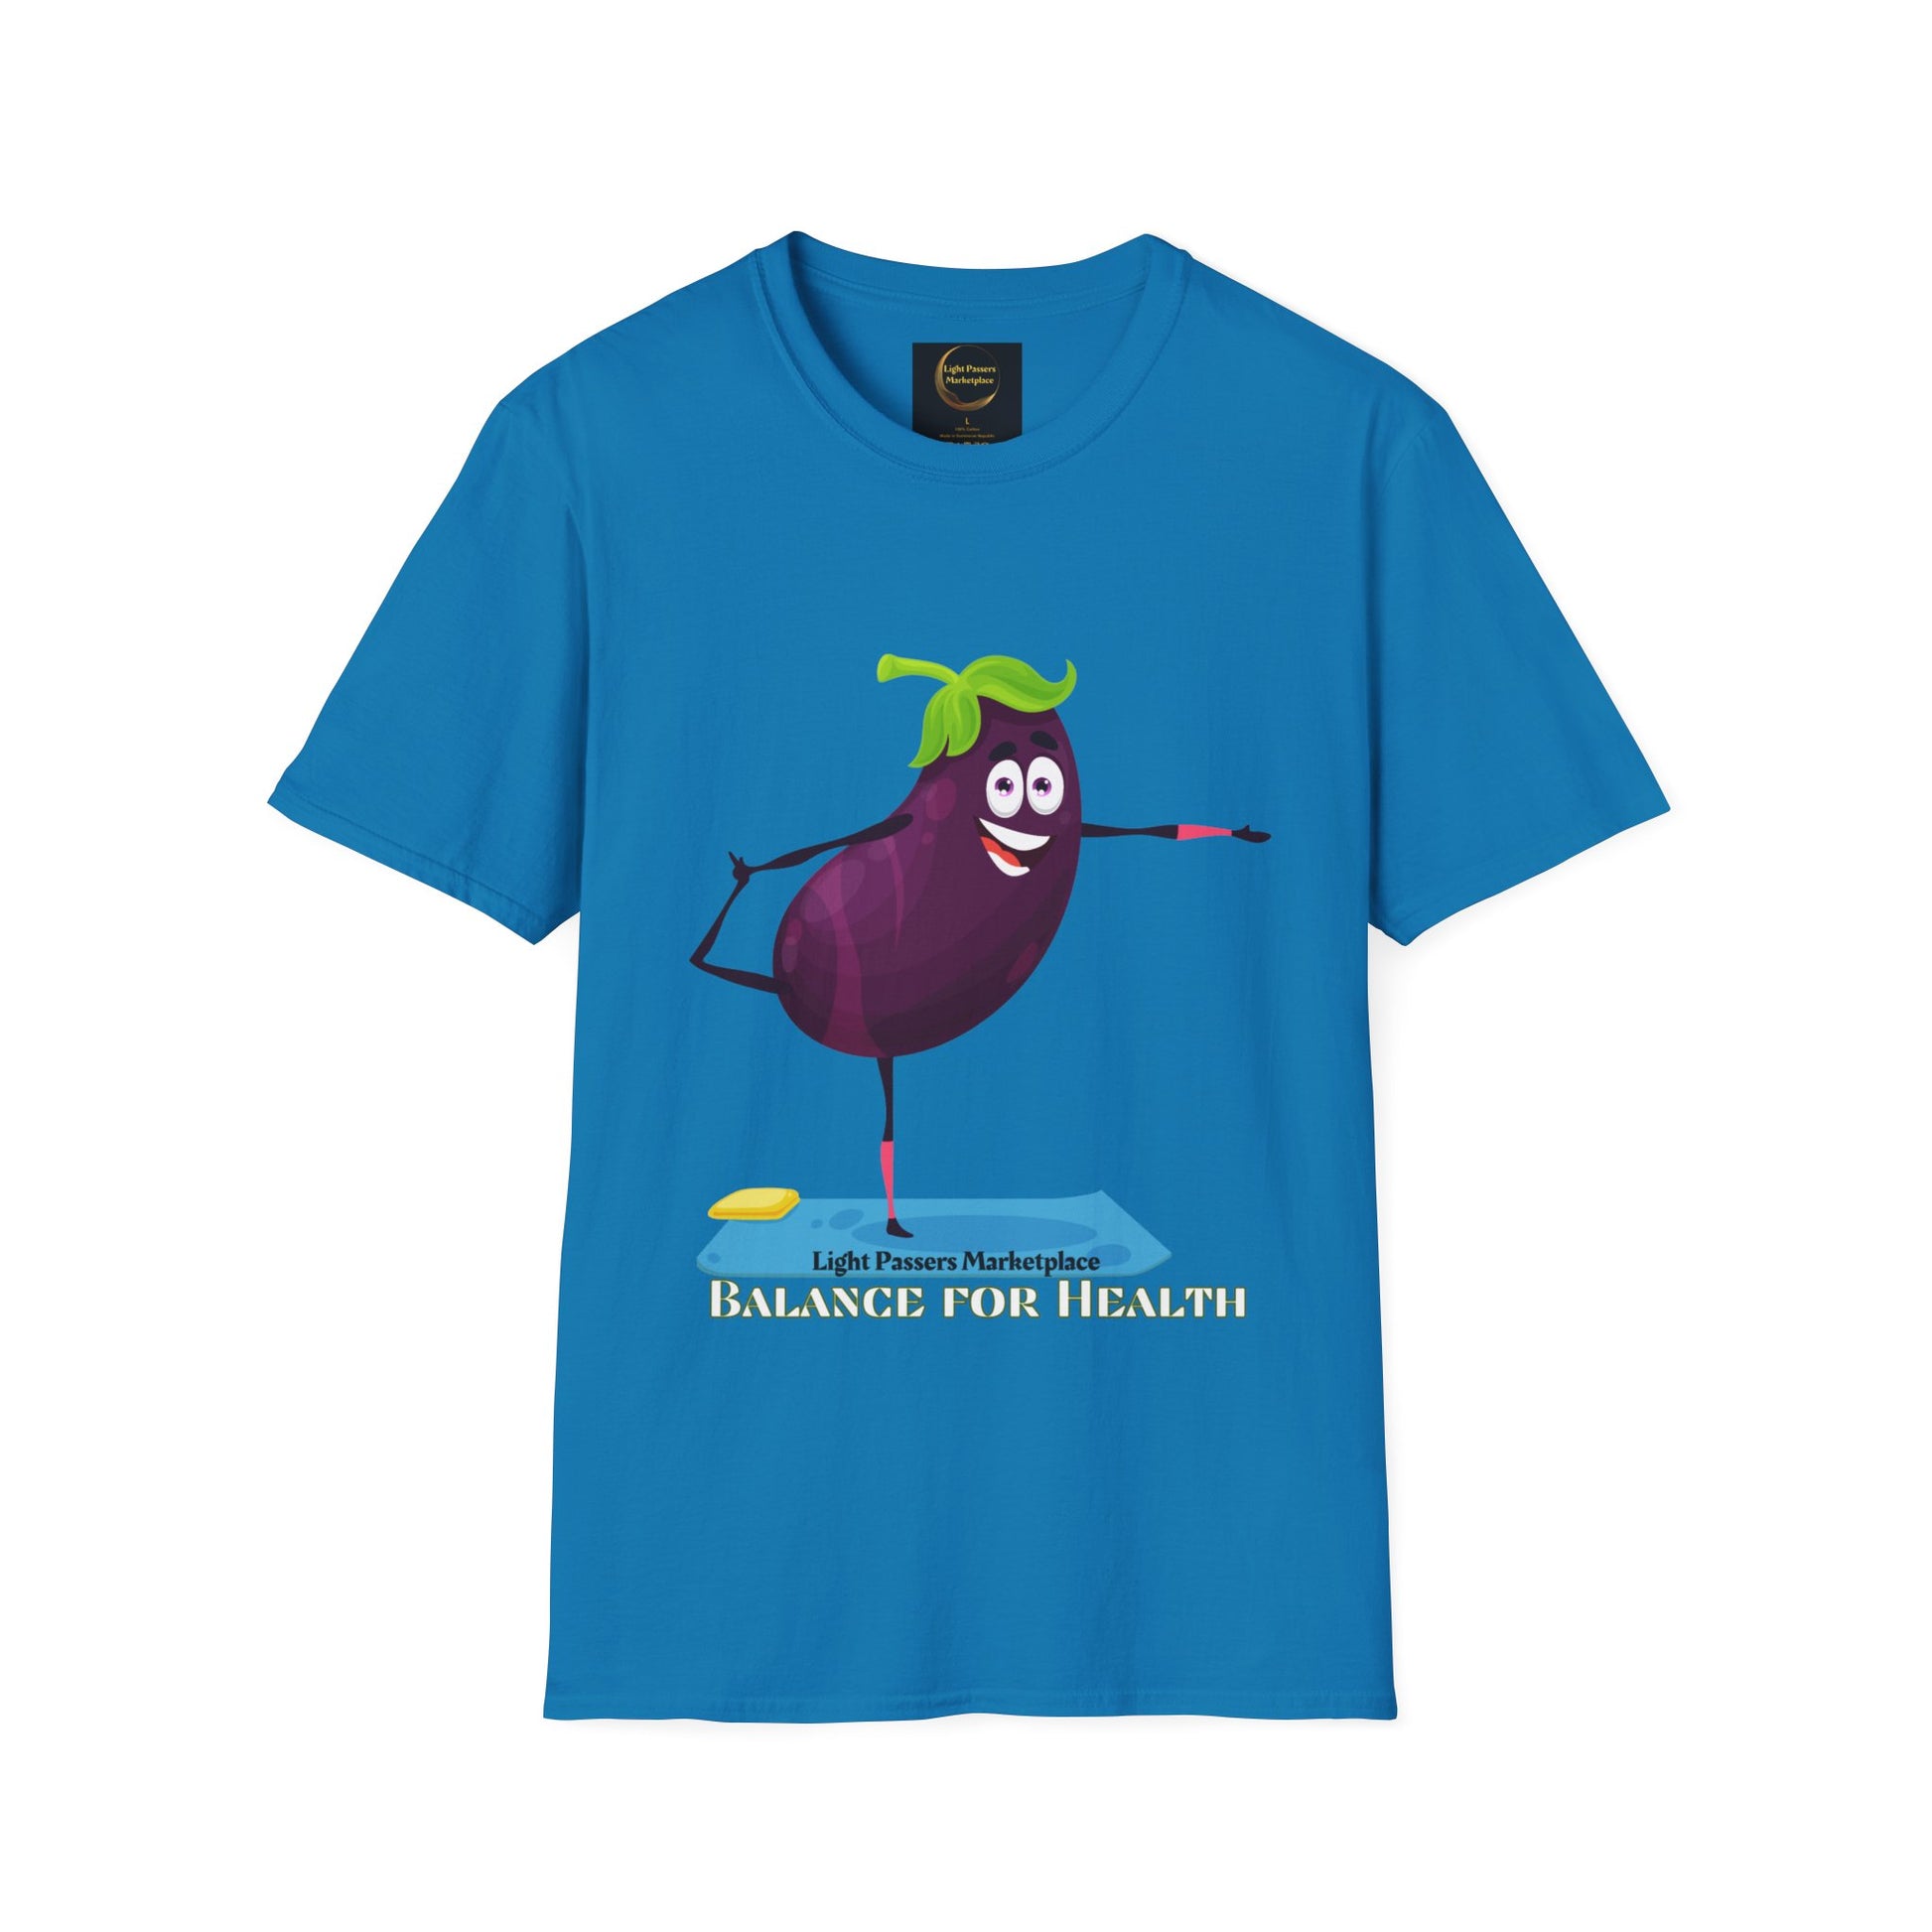 A blue unisex t-shirt featuring a cartoon eggplant balancing on one leg. Made of soft 100% ring-spun cotton, with twill tape shoulders and ribbed collar. Ethically sourced and Oeko-Tex certified.